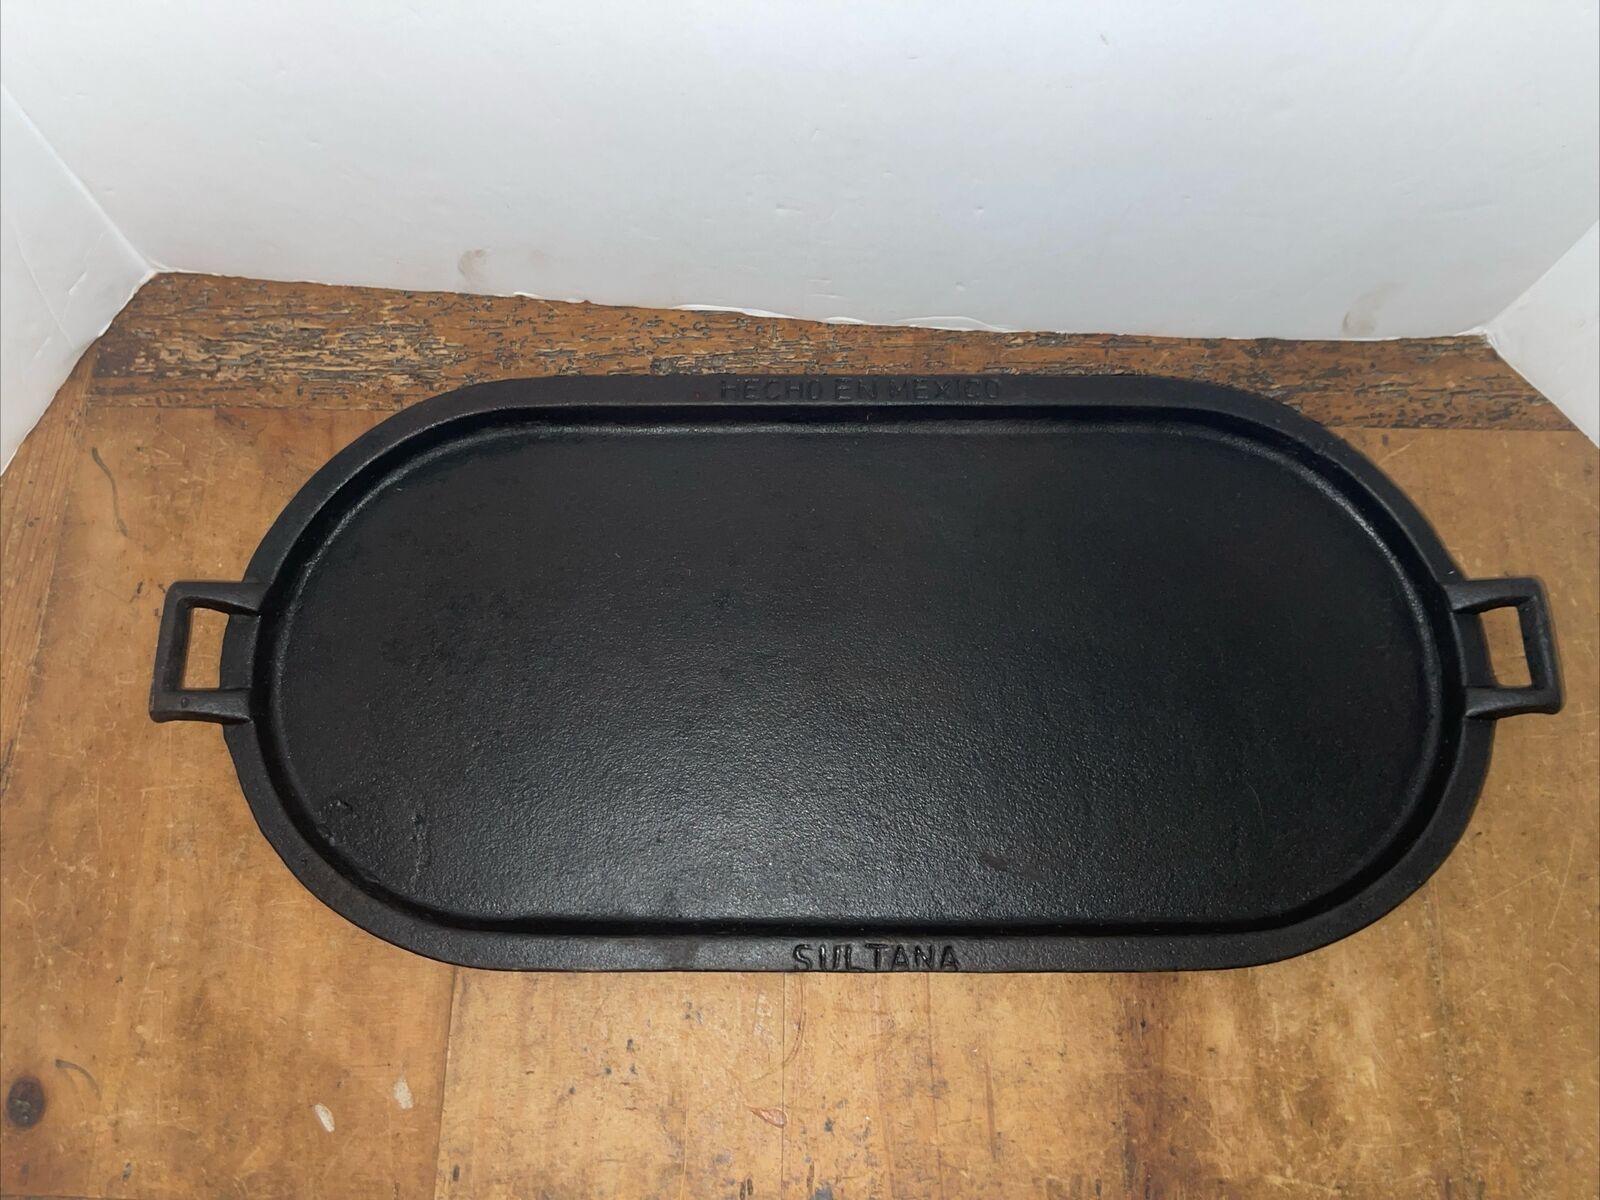 Fully Restored Seasoned Cast Iron Comal Budare Griddle Sultana Hecho En Mexico